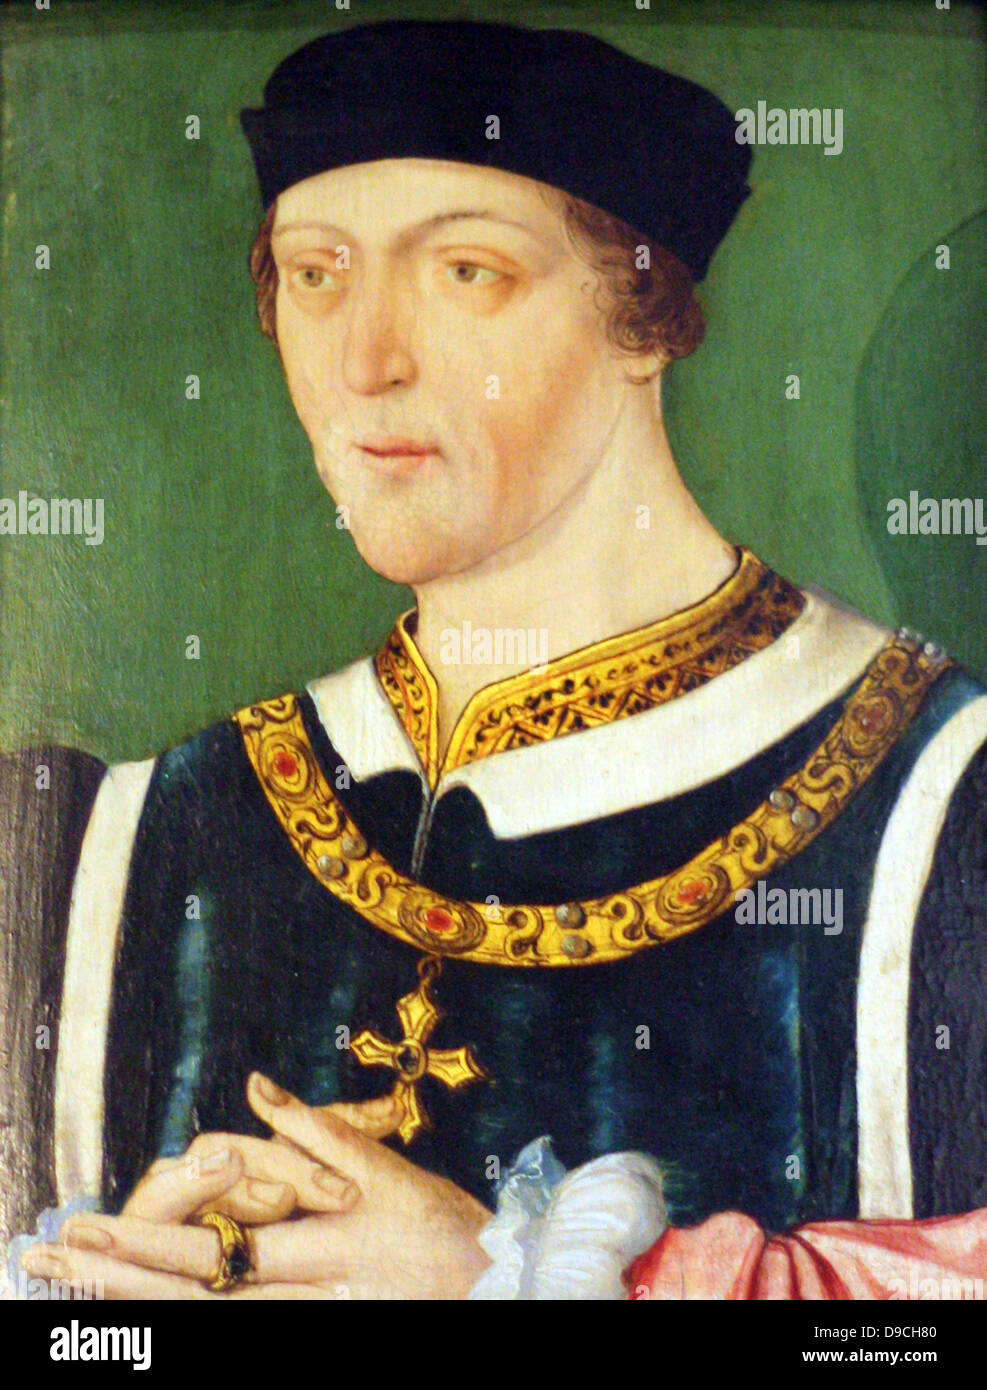 Portrait of King Henry VI (1422-1461), by an unknown artist. Henry VI (1421-1471) King of England from 1422 to 1461 and again from 1470 to 1471, disputed King of France from 1422 to 1453. His periods of insanity and his inherent benevolence eventually required his wife, Margaret of Anjou, to assume control of his kingdom, which contributed to his own downfall, the collapse of the House of Lancaster, and the rise of the House of York. Stock Photo